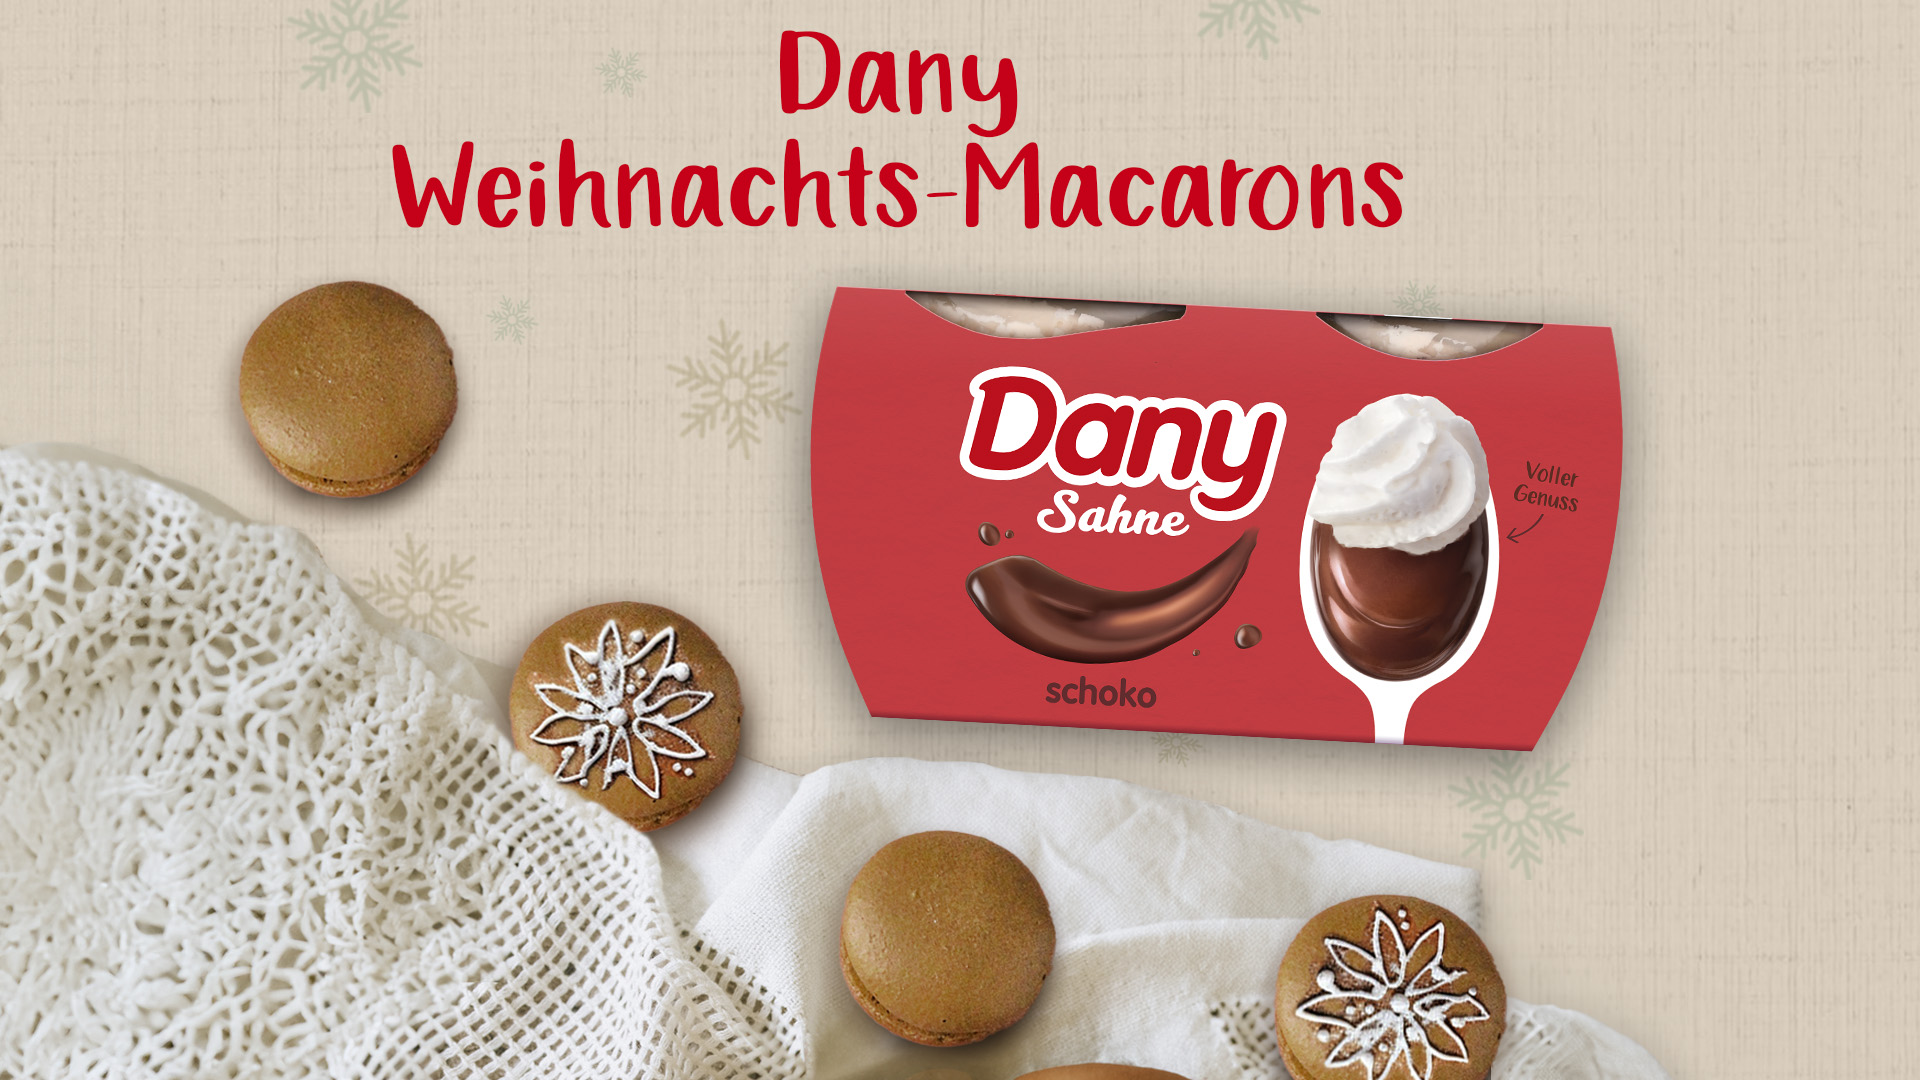 Dany Weihnachts-Macarons